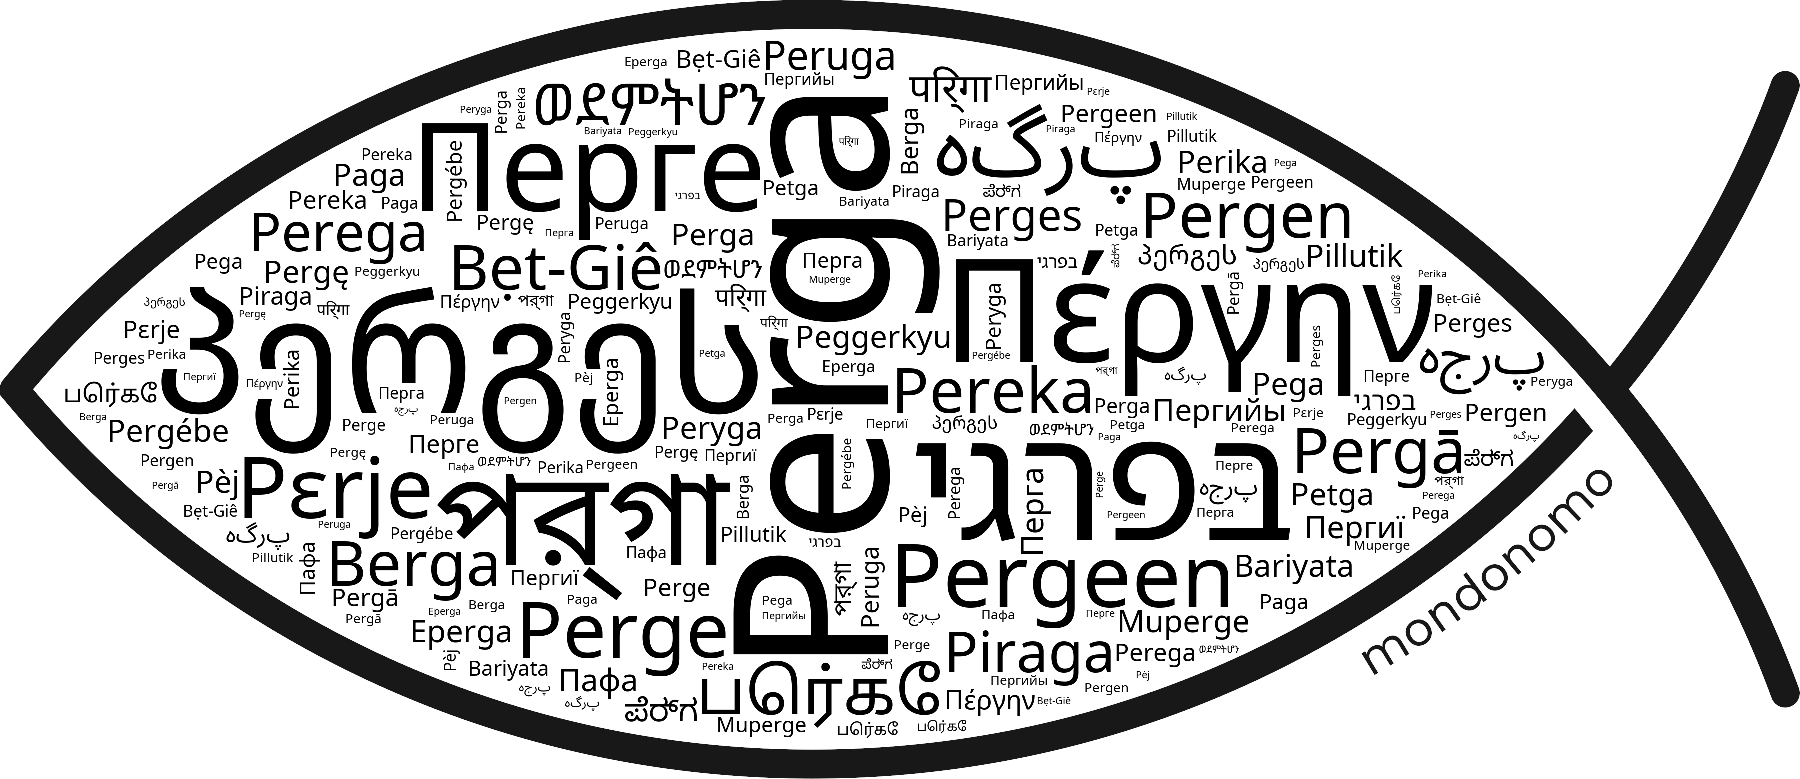 Name Perga in the world's Bibles